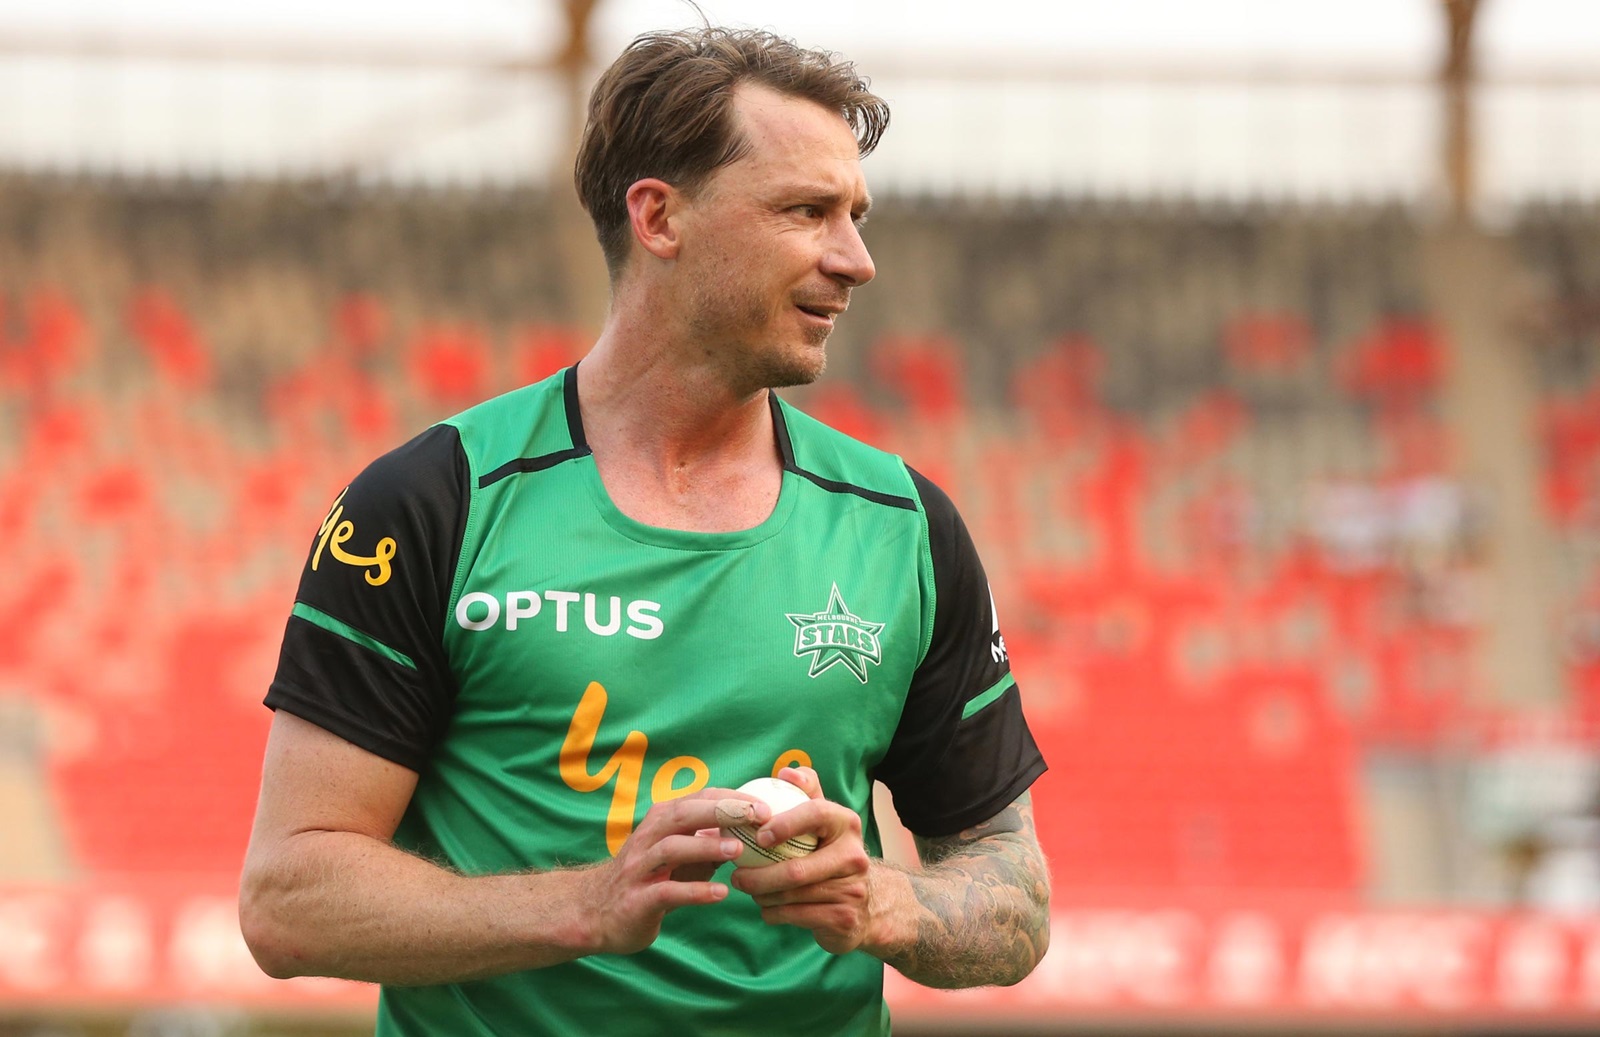 No time for you as a human': Dale Steyn lashes out at commentator for  remark on hairstyle during PSL 2021 - Cricket Age